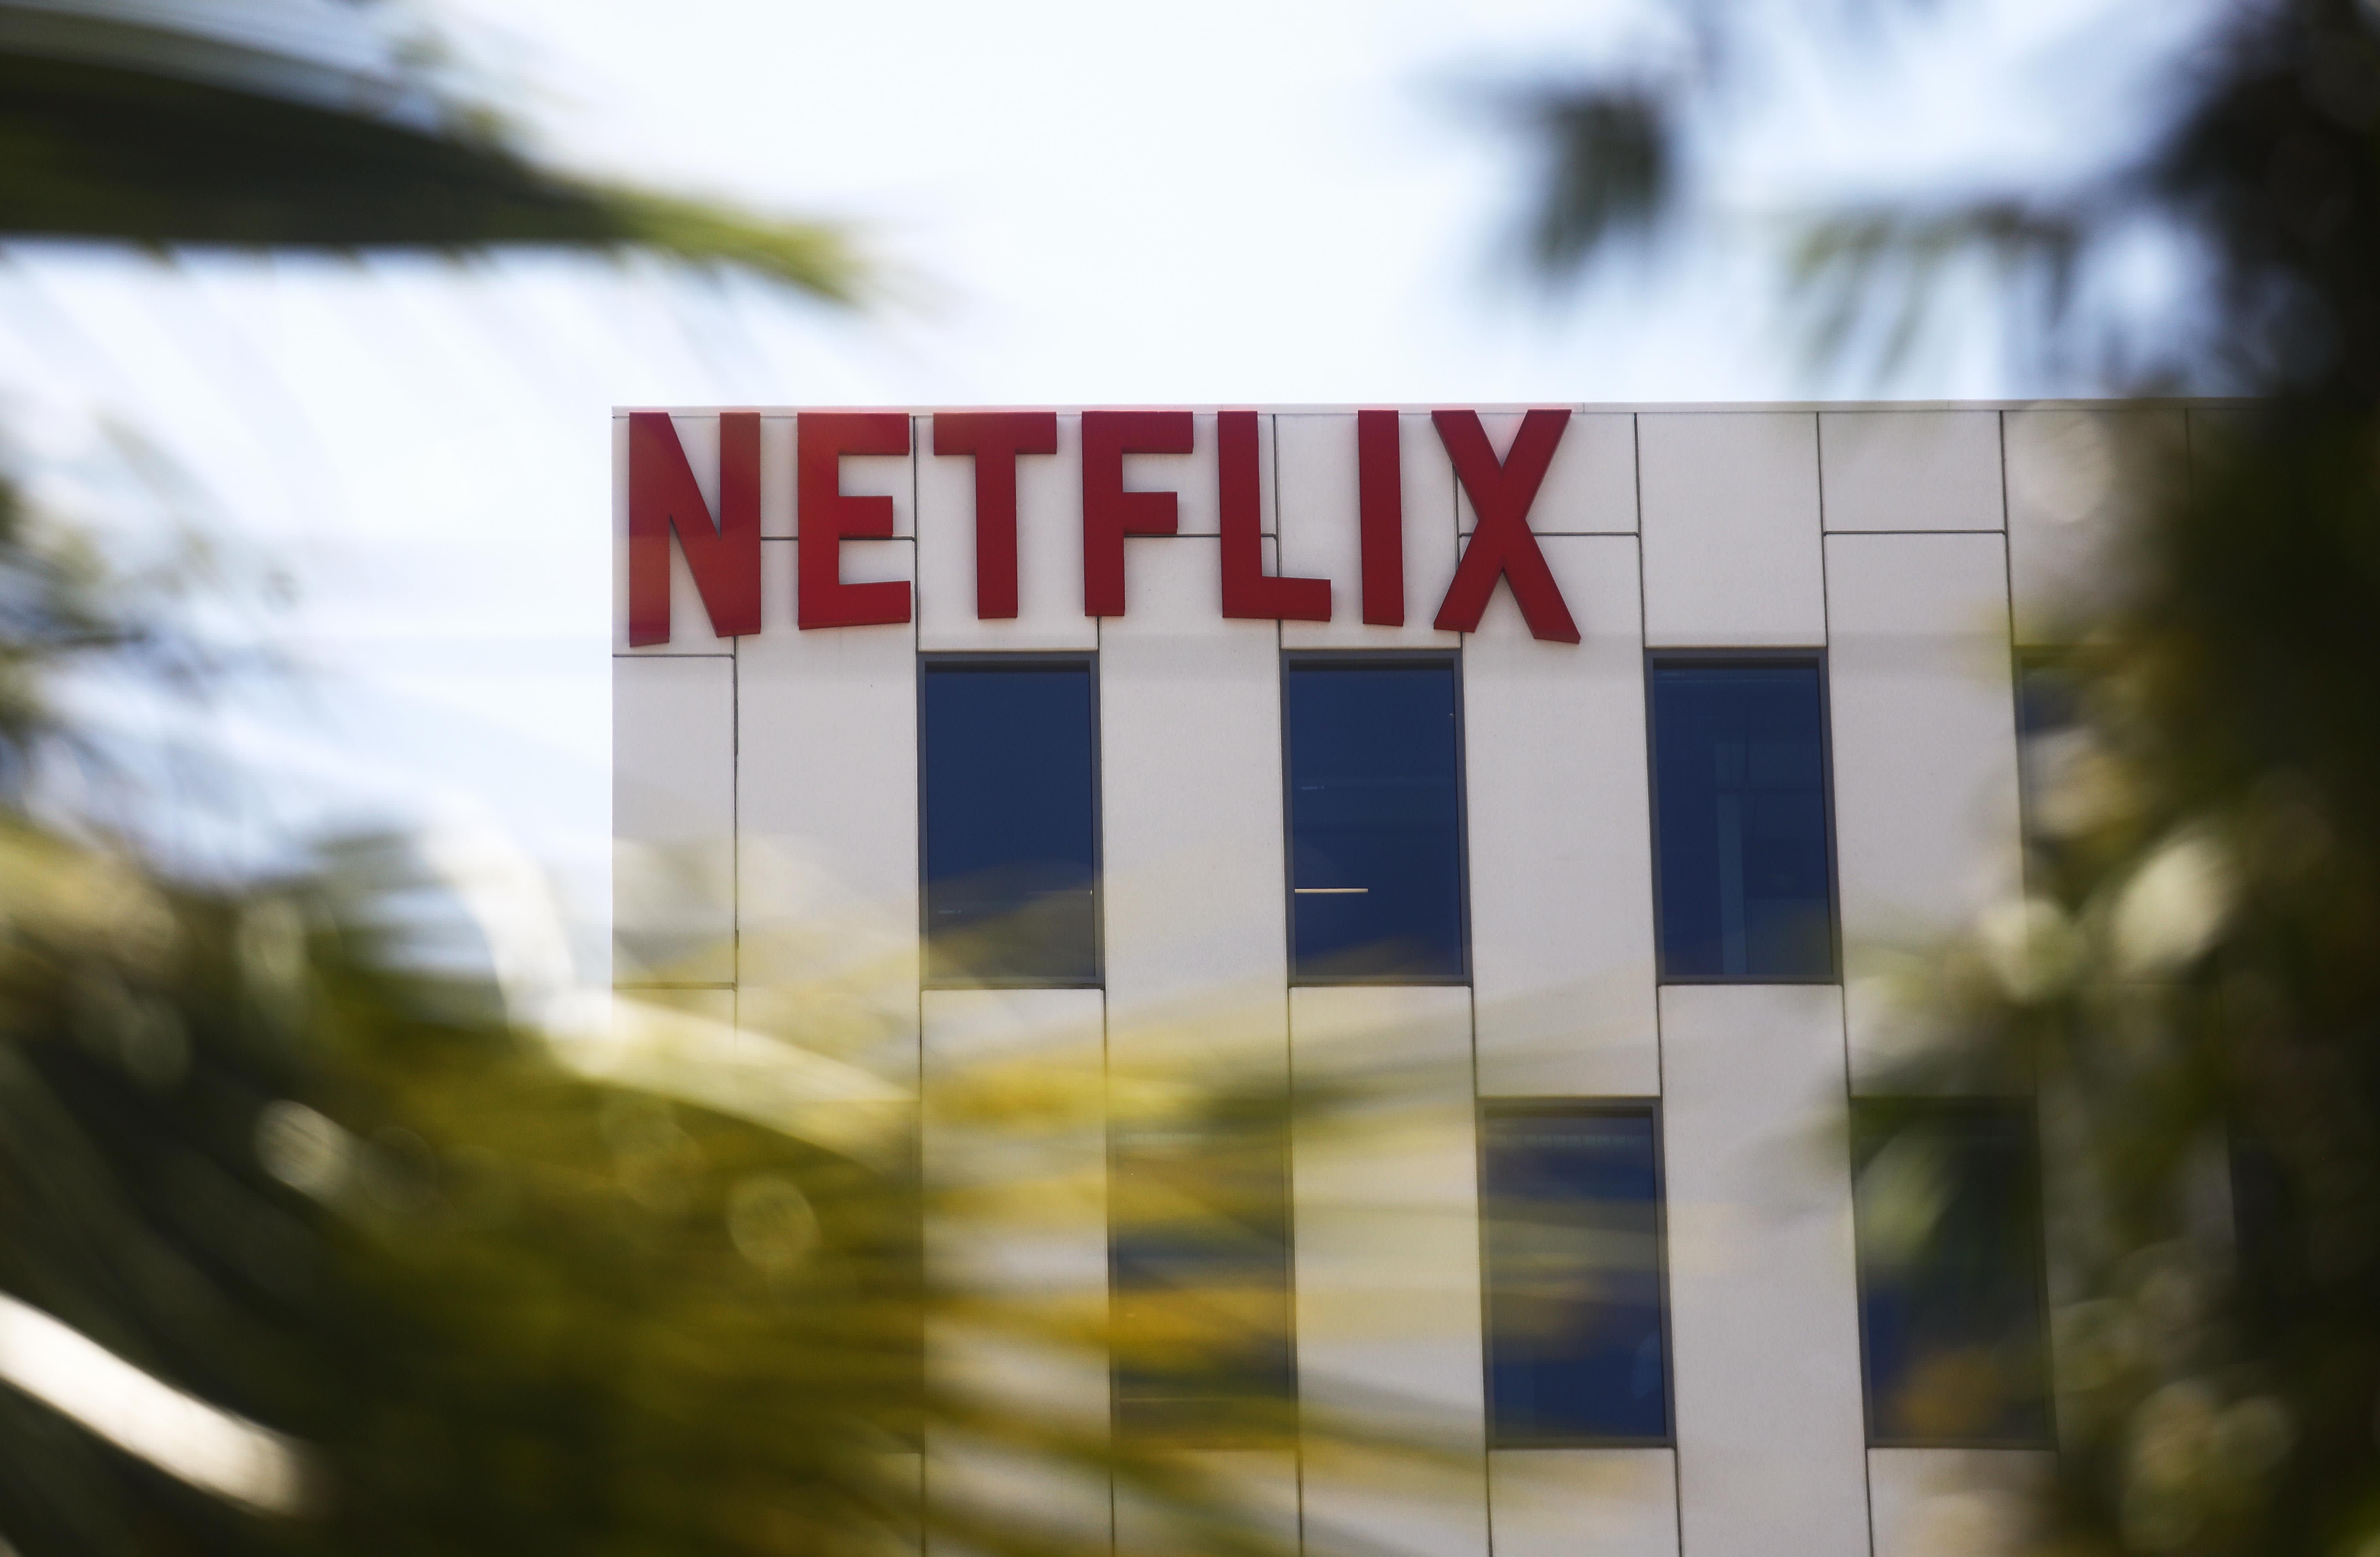 Here are Thursday’s biggest analyst calls of the day: Netflix, Royal Caribbean, Disney & more